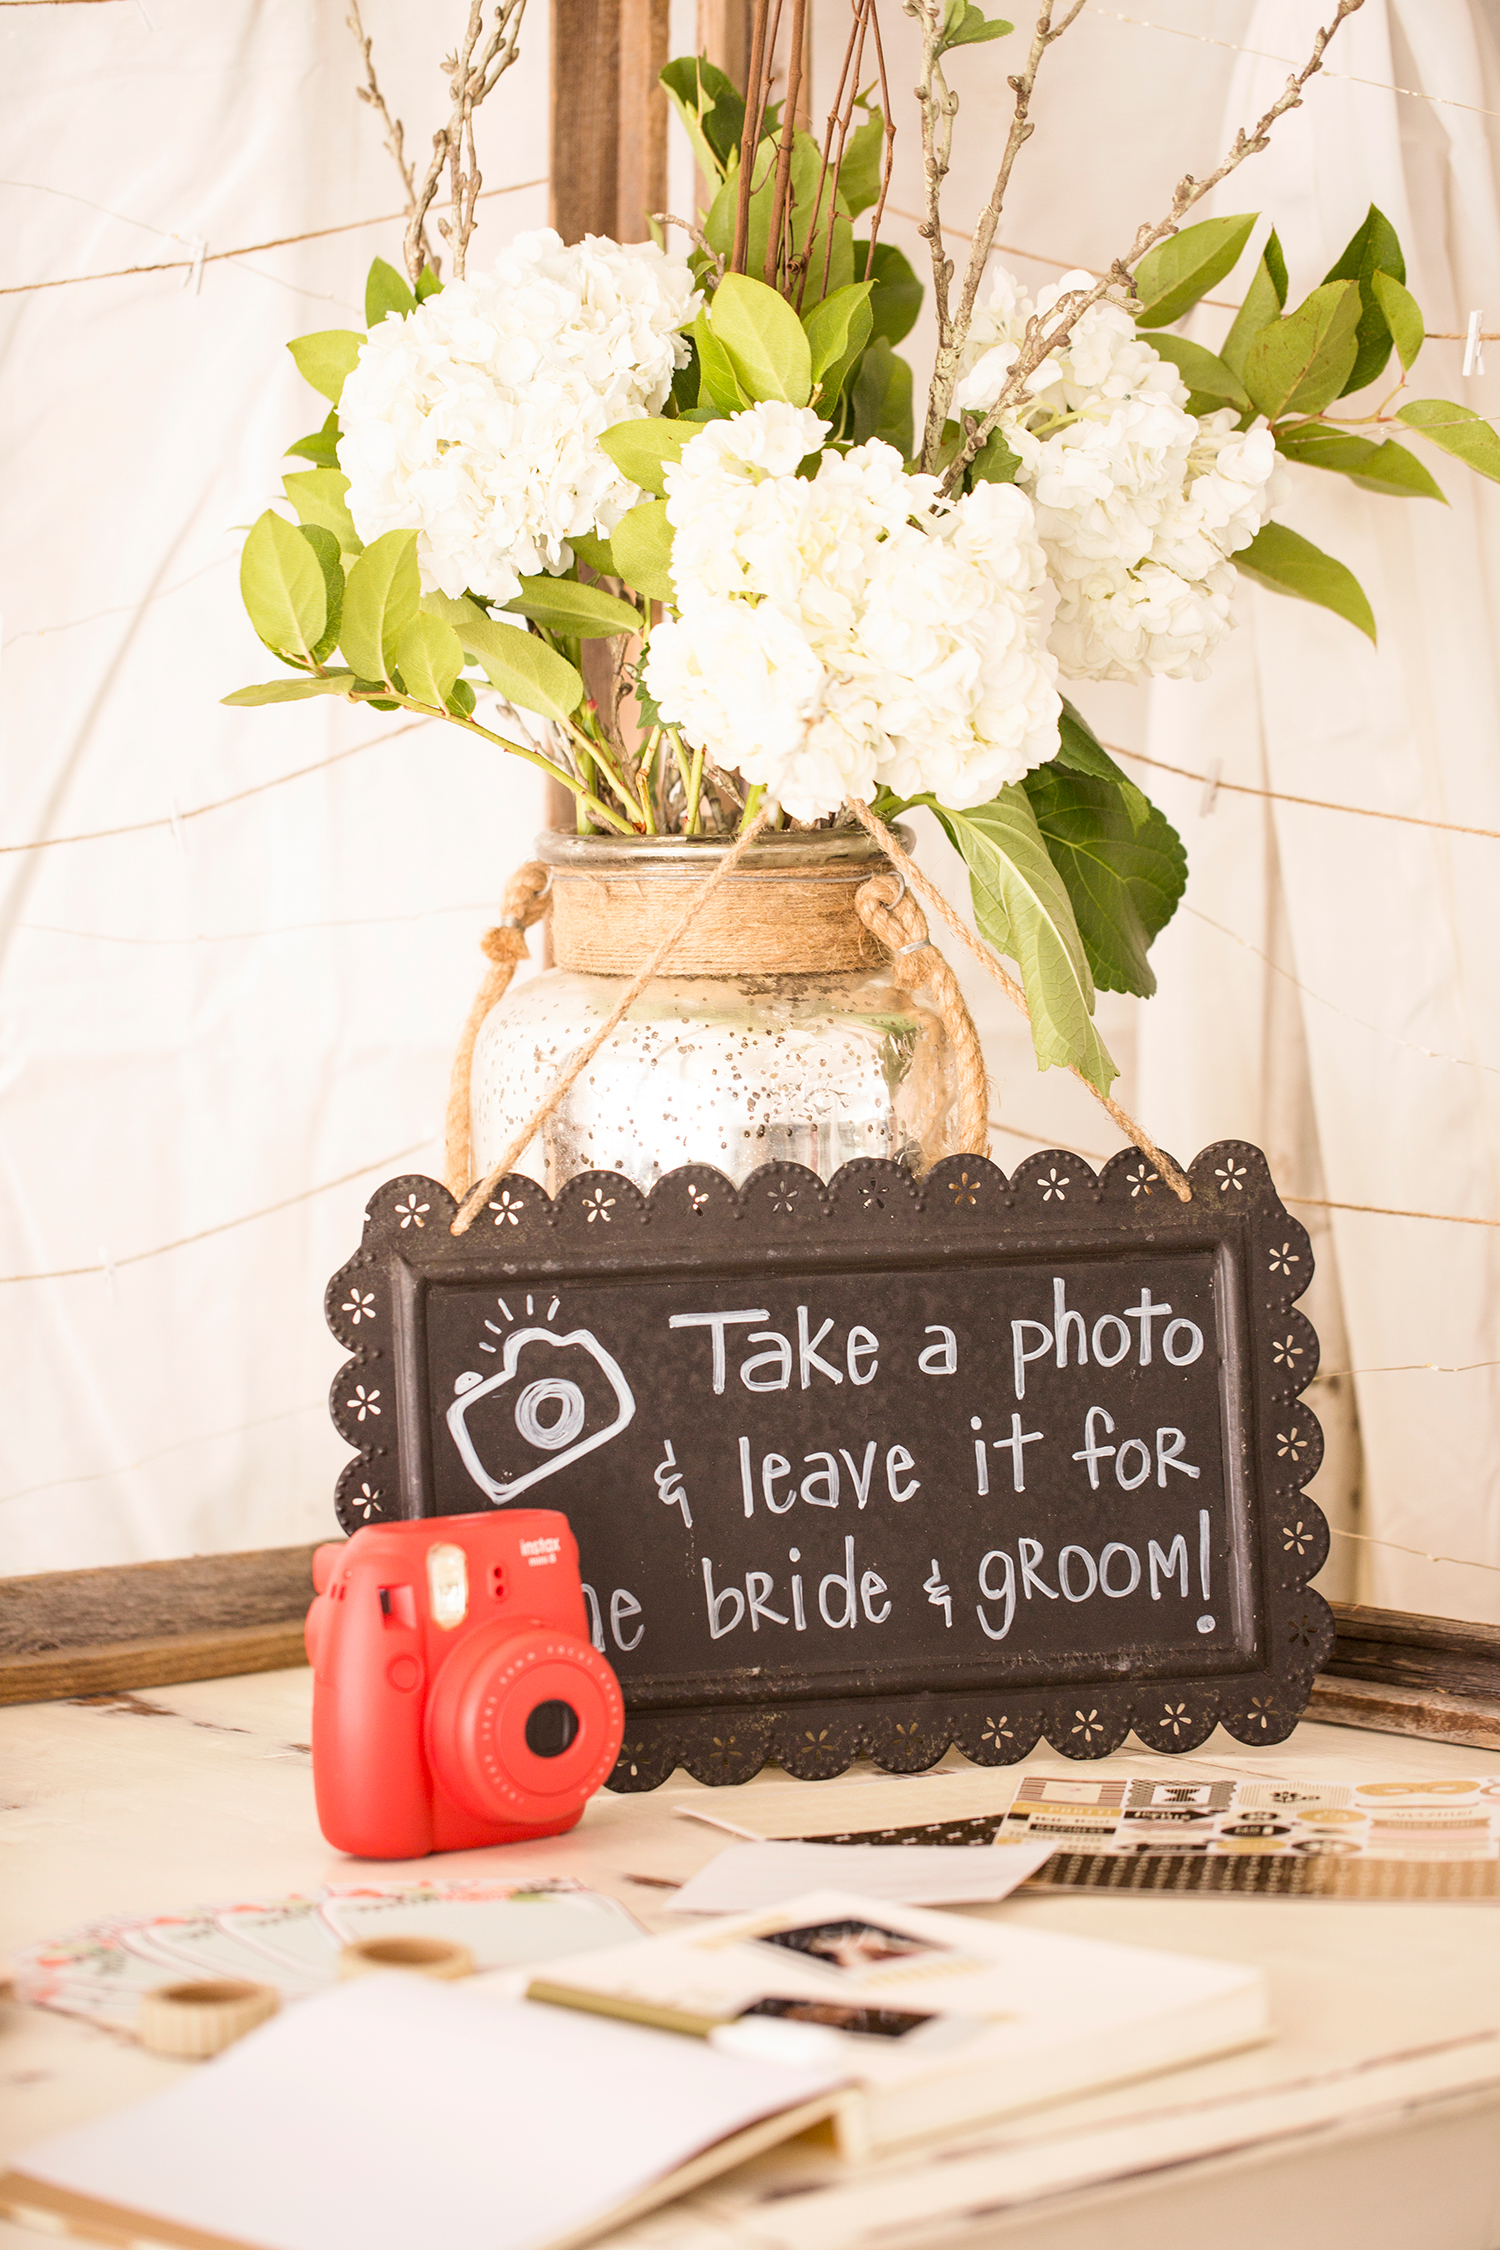 How to Entertain Kids at Your Wedding - Image Property of www.j-dphoto.com